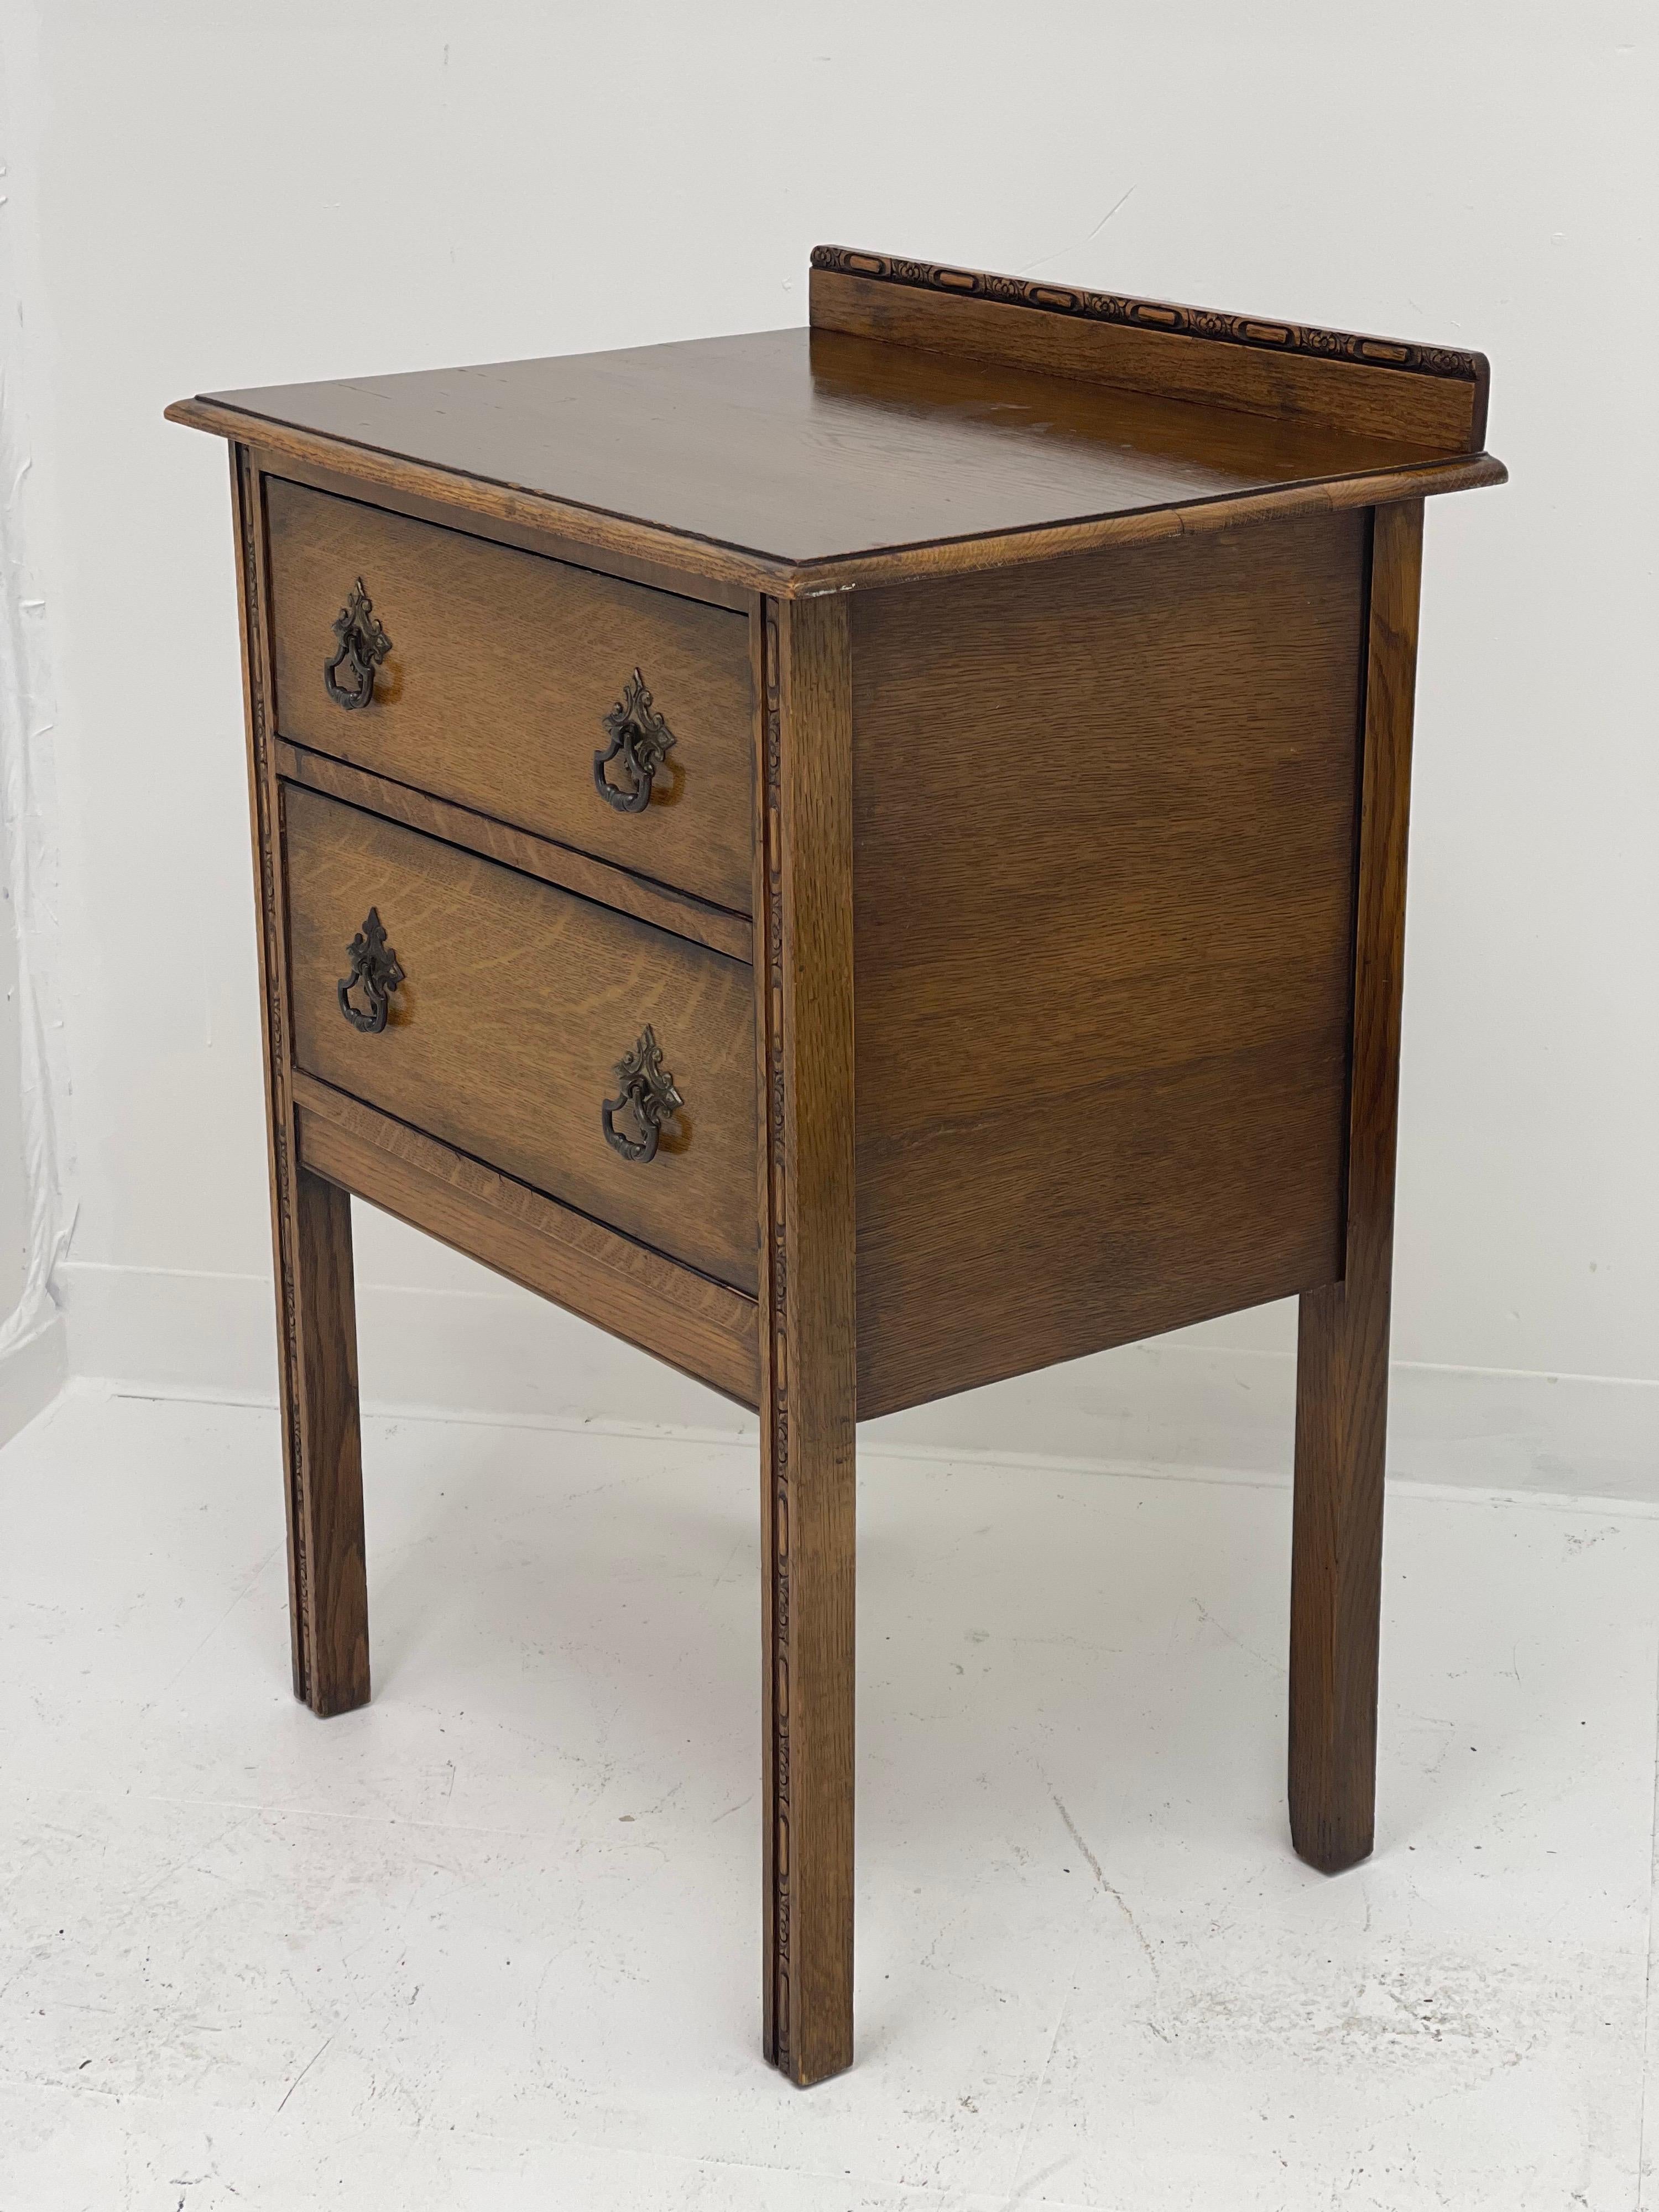 Vintage Early American Oak Accent Table or Endtable with Drawers In Good Condition For Sale In Seattle, WA